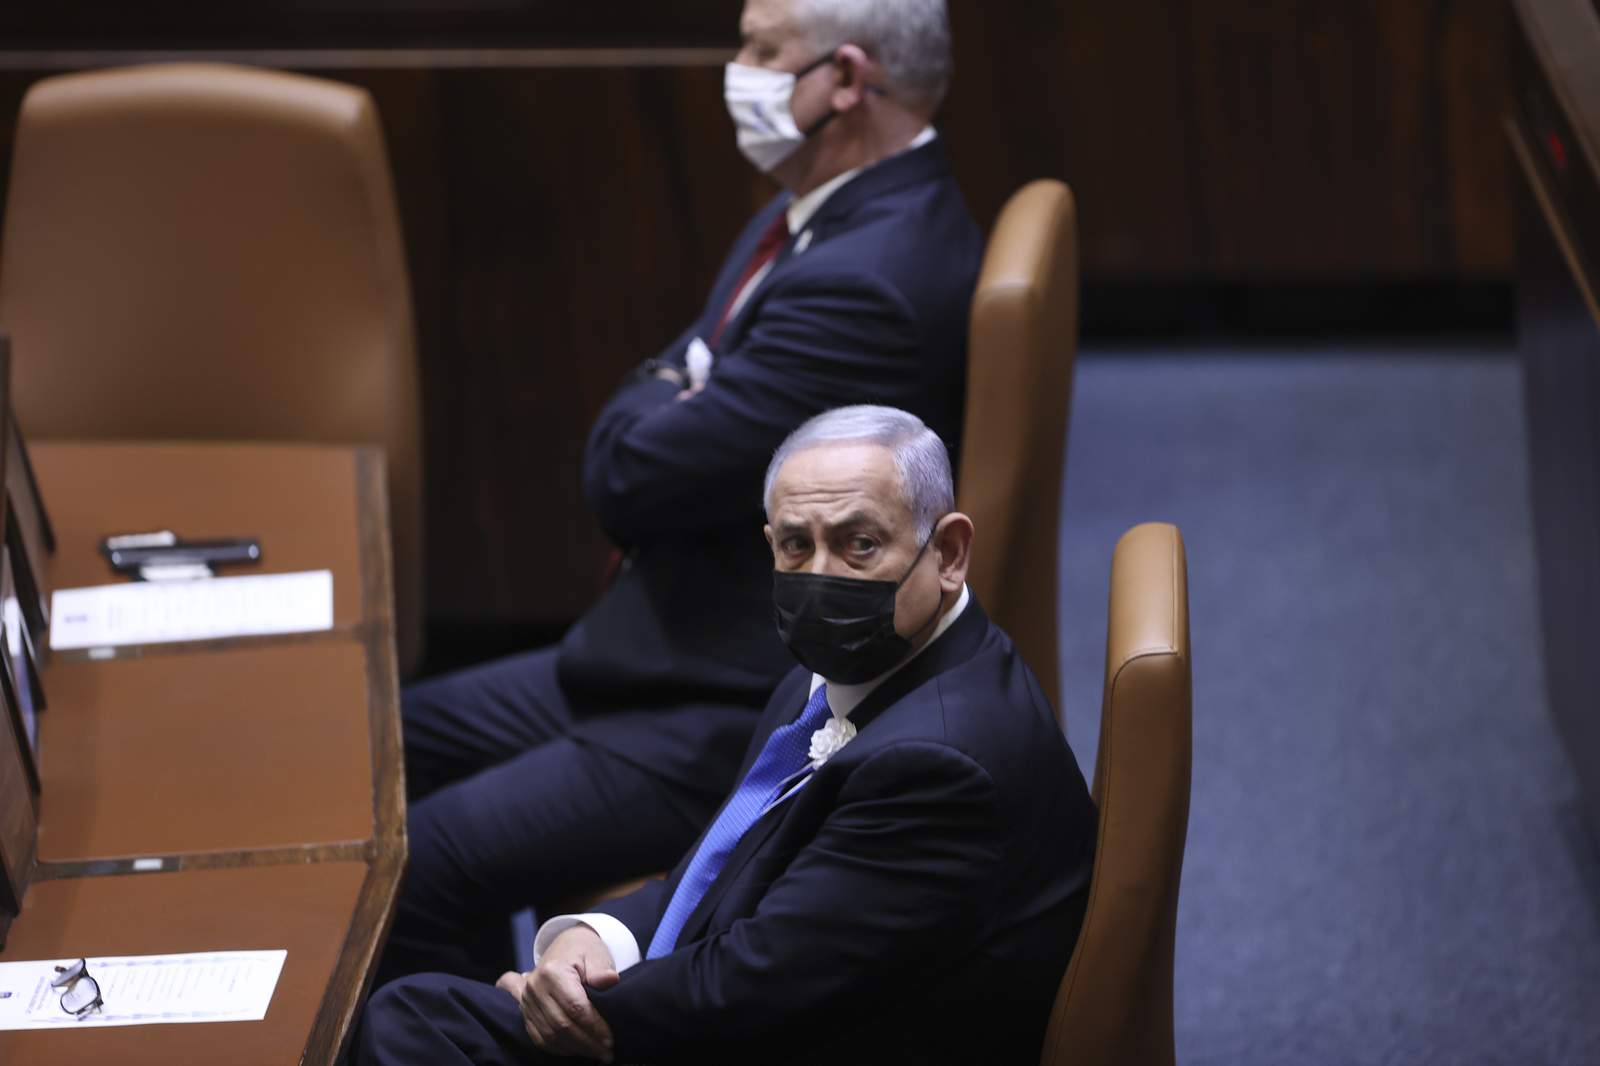 Netanyahu asked to form new government, but faces long odds